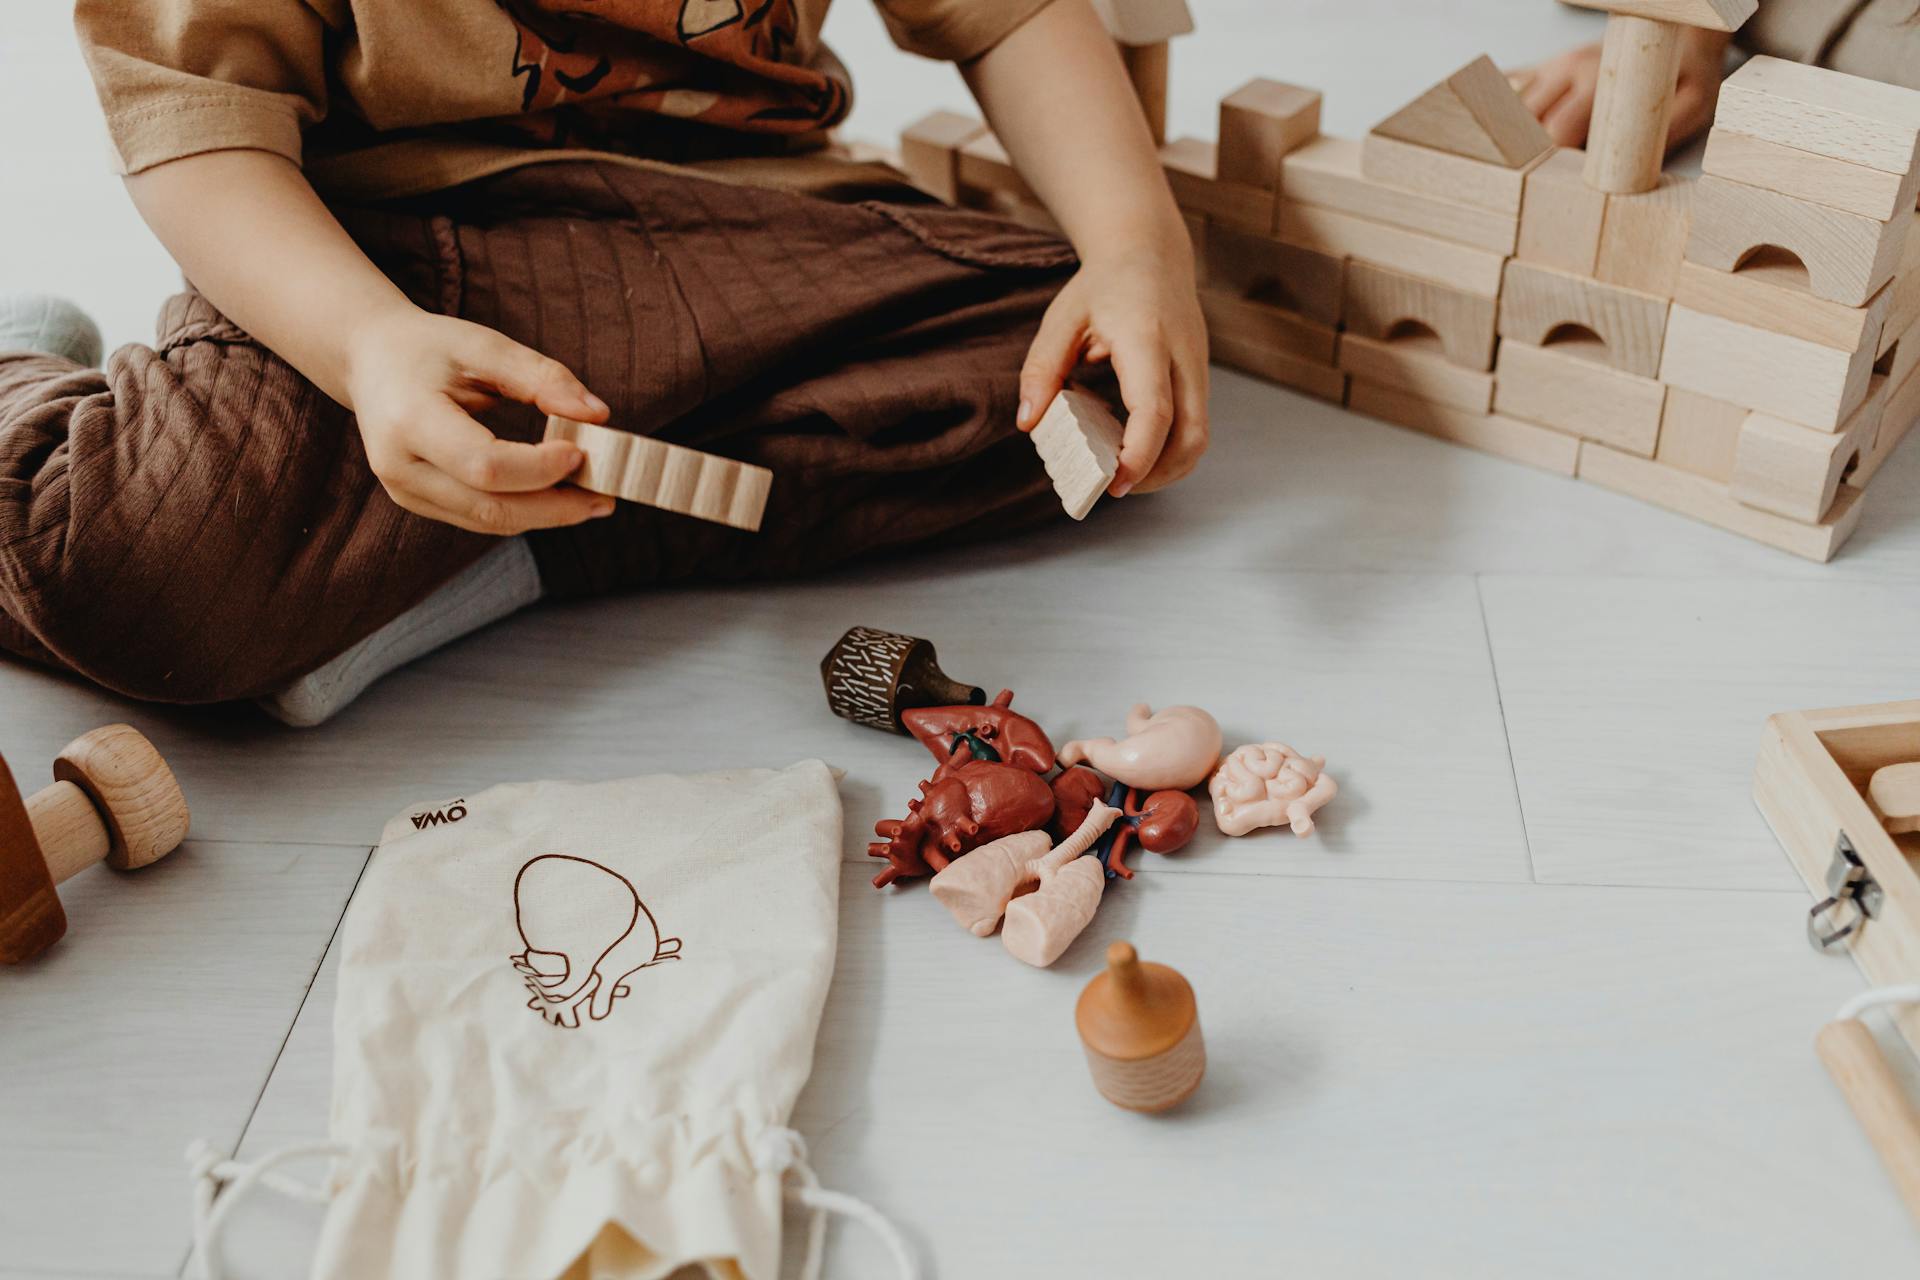 A child playing with toys | Source: Pexels